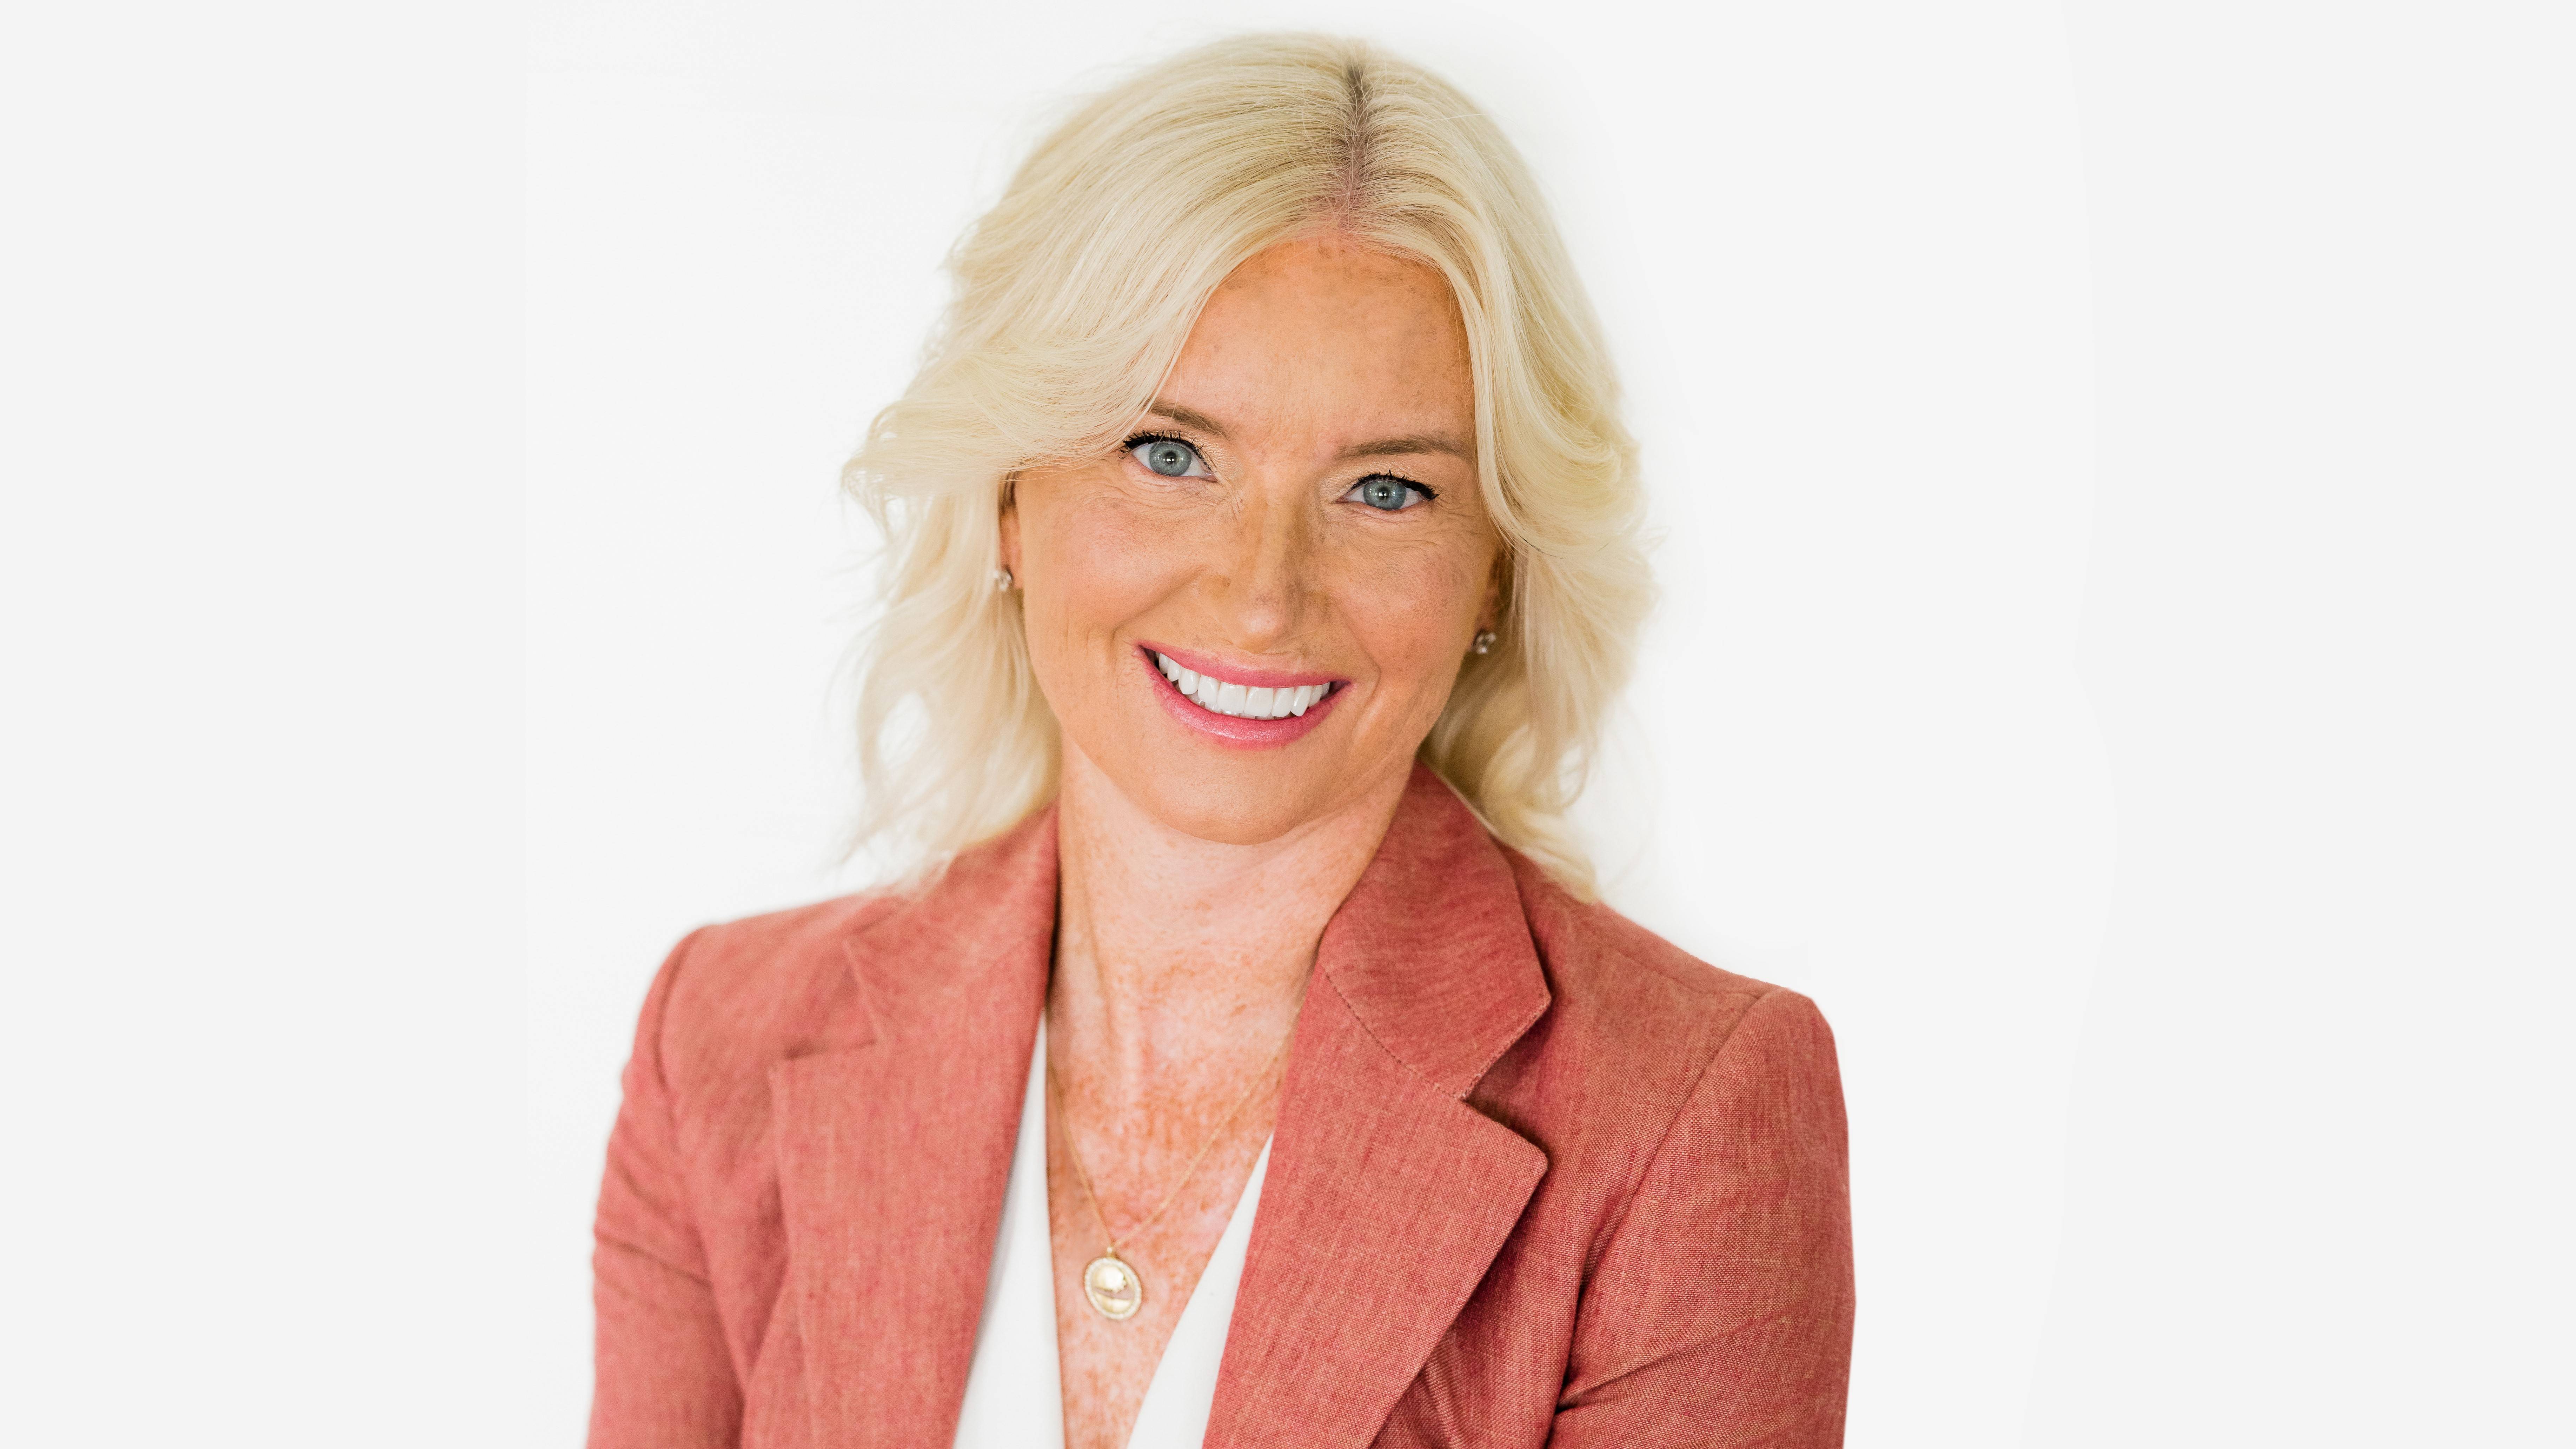 The Walt Disney Company appoints Media and Technology Executive Carolyn Everson to its board of directors